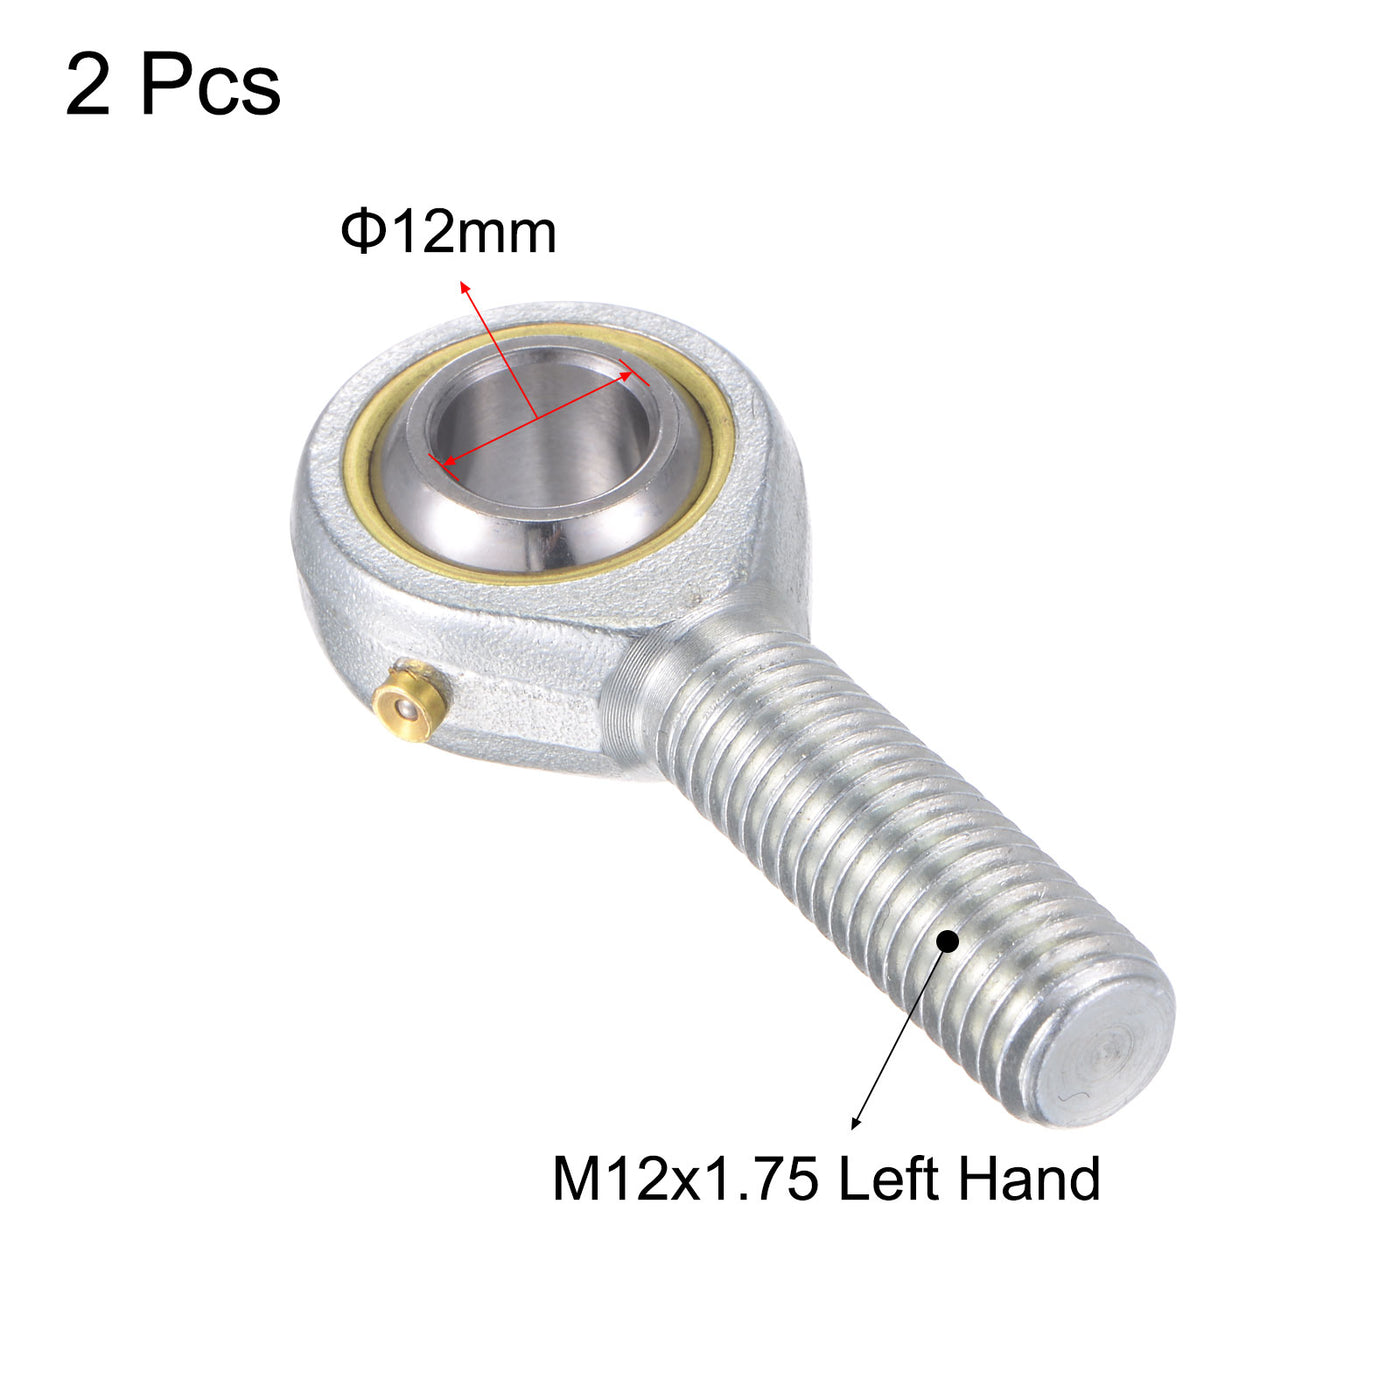 uxcell Uxcell 2pcs POS12 Rod End Bearing 12mm Bore Self-lubricated M12 Left Hand Male Thread